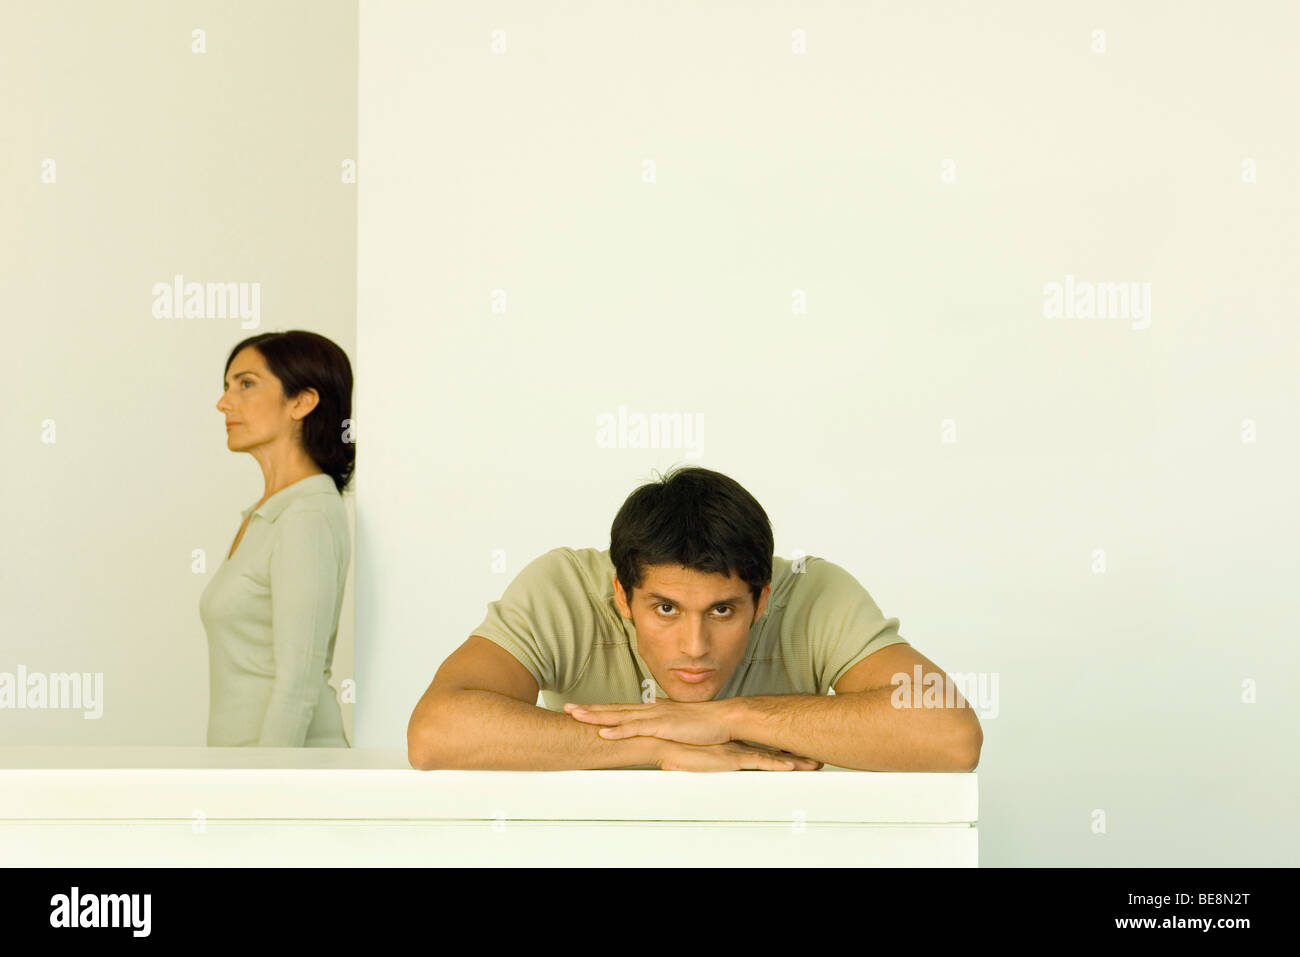 Man resting head on arms looking at camera, woman in background looking away Stock Photo